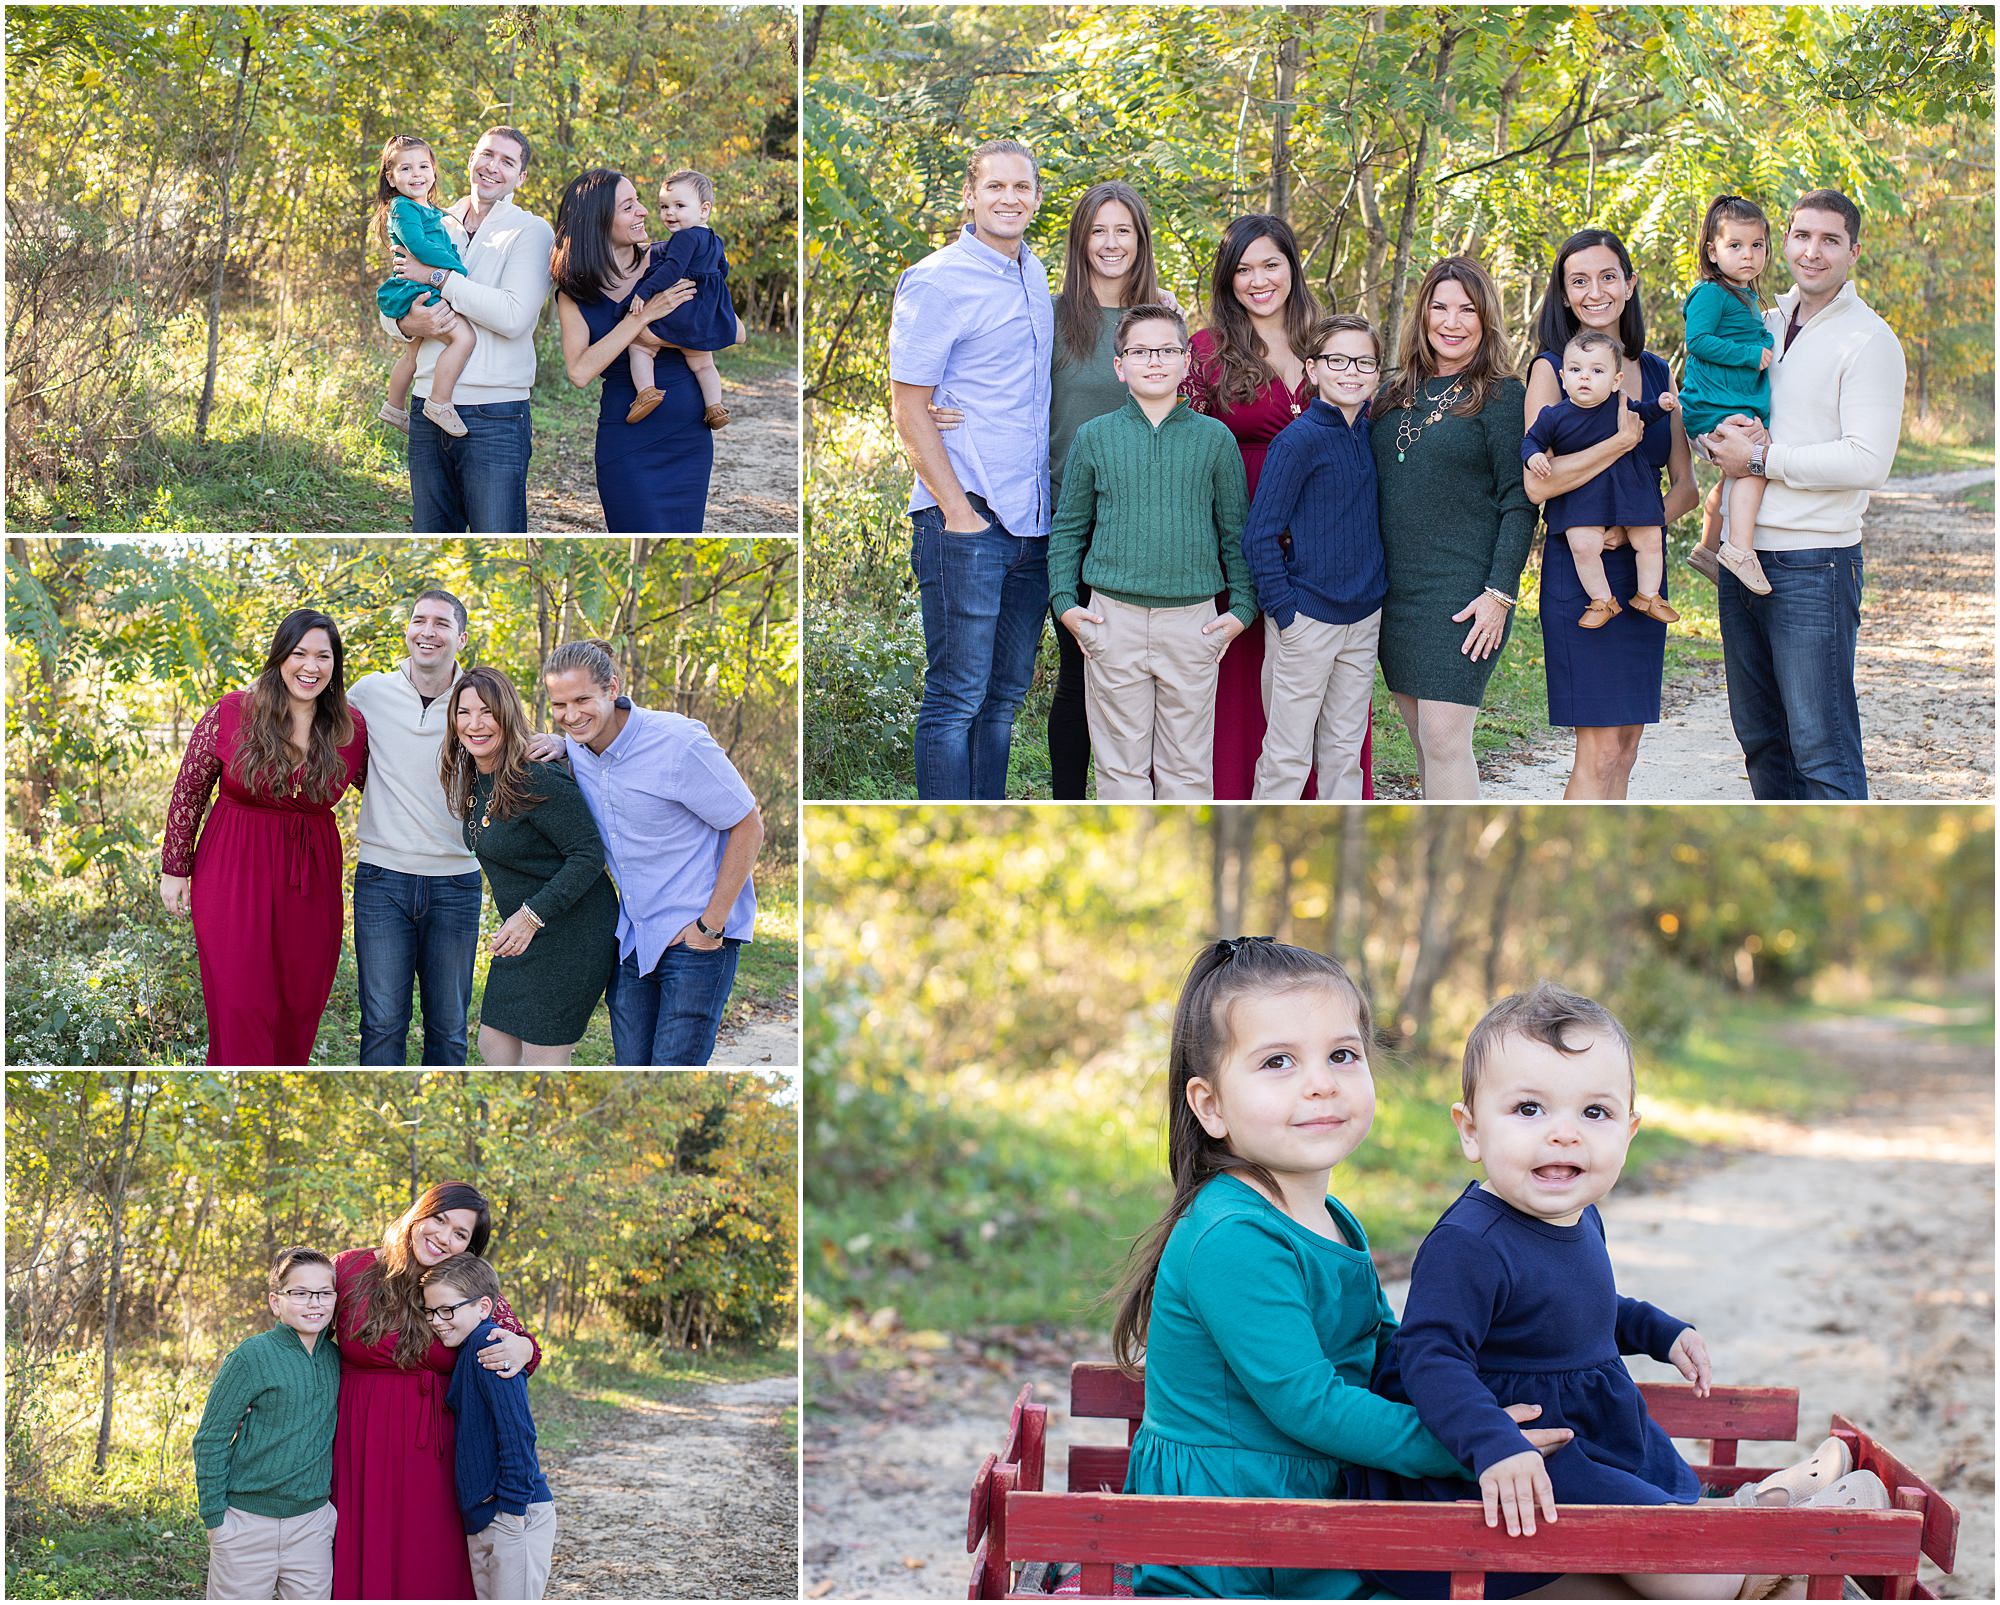 An extended family session at a South Jersey holiday family photo session